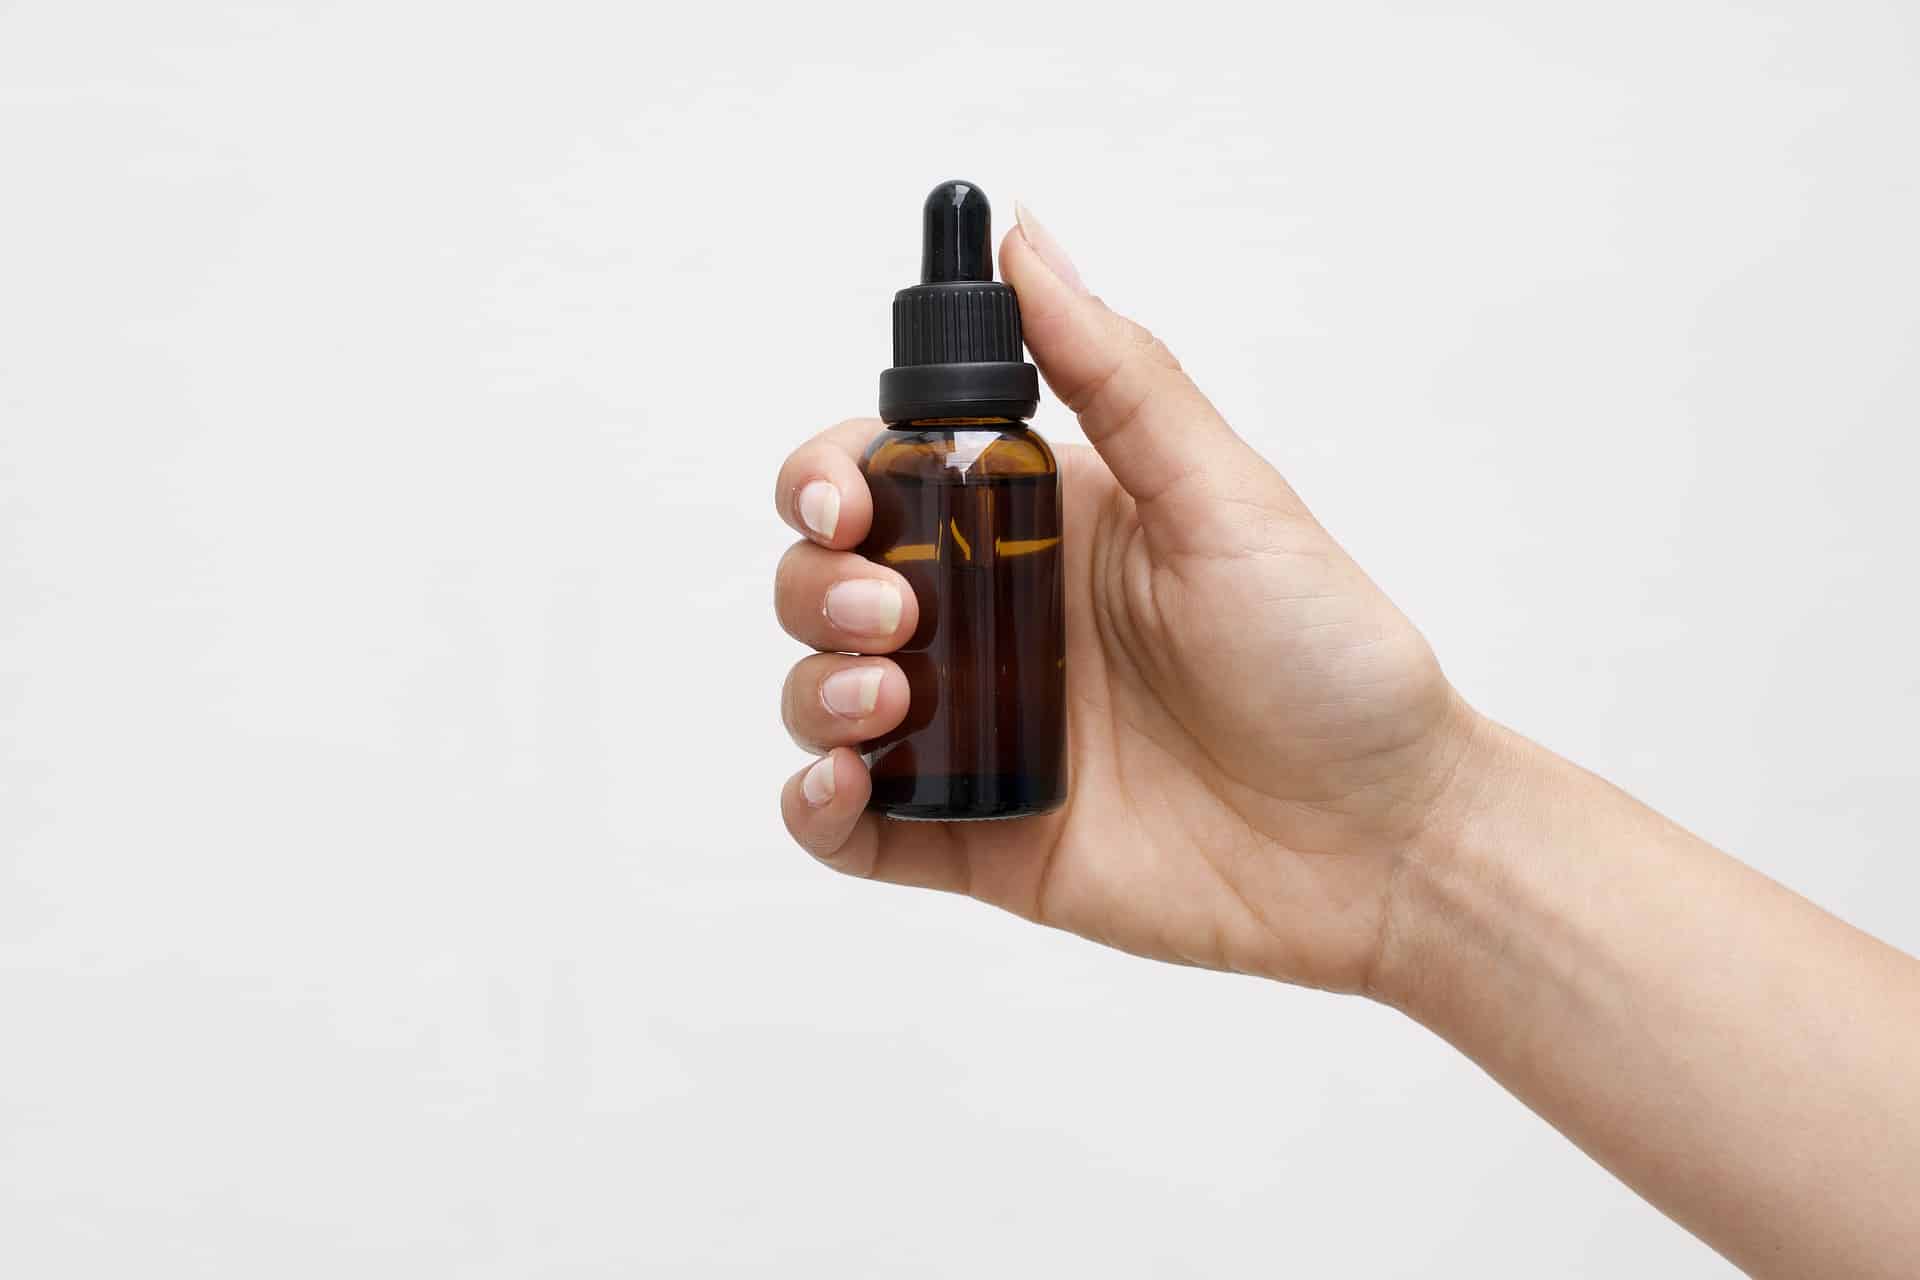 Vaping THC Oil: Effects, Risks, and How to Get Help